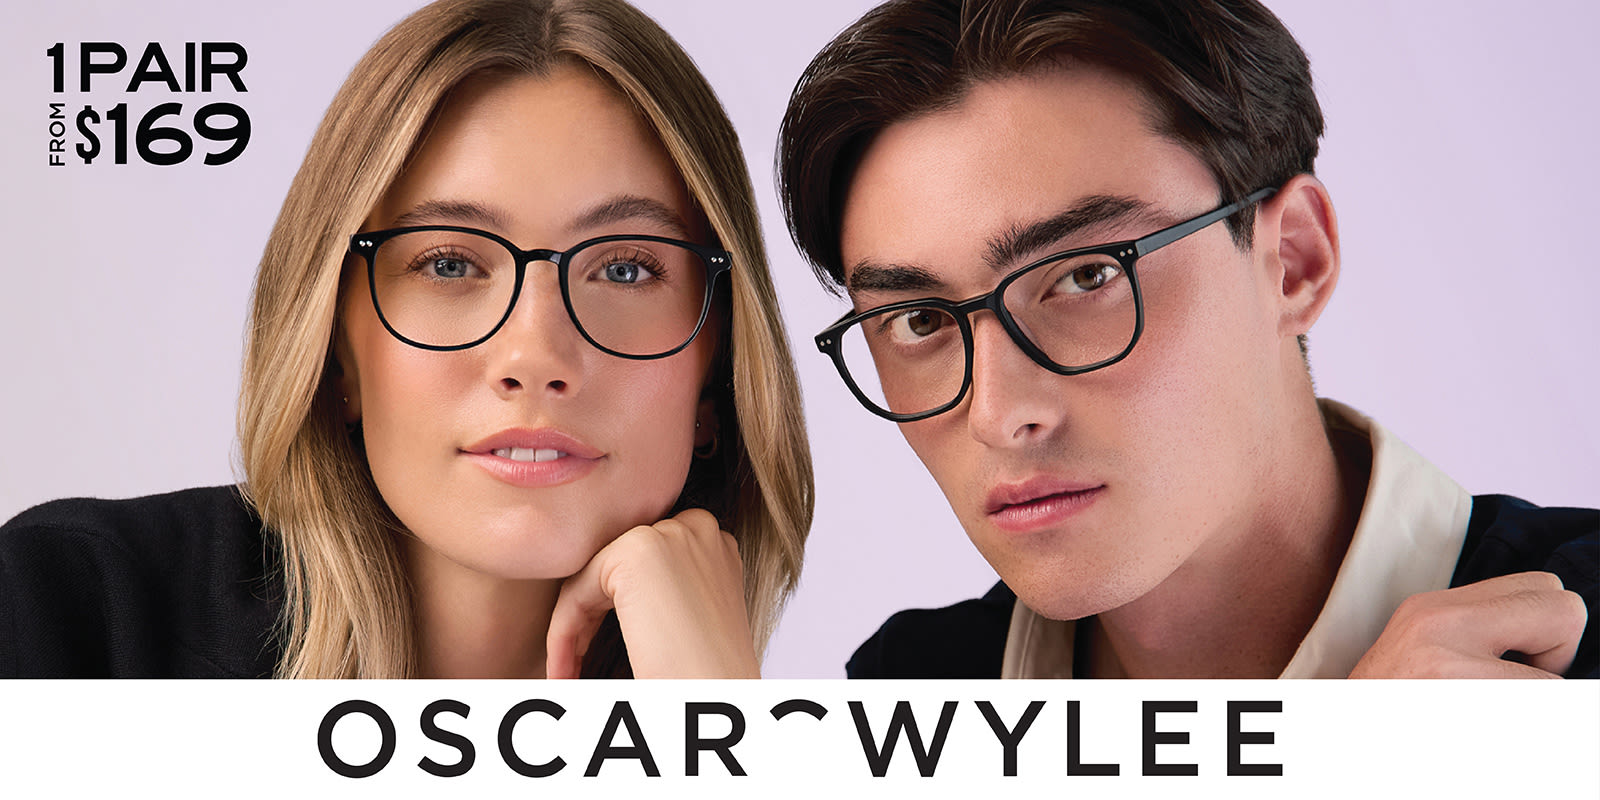 See in Style at Oscar Wylee